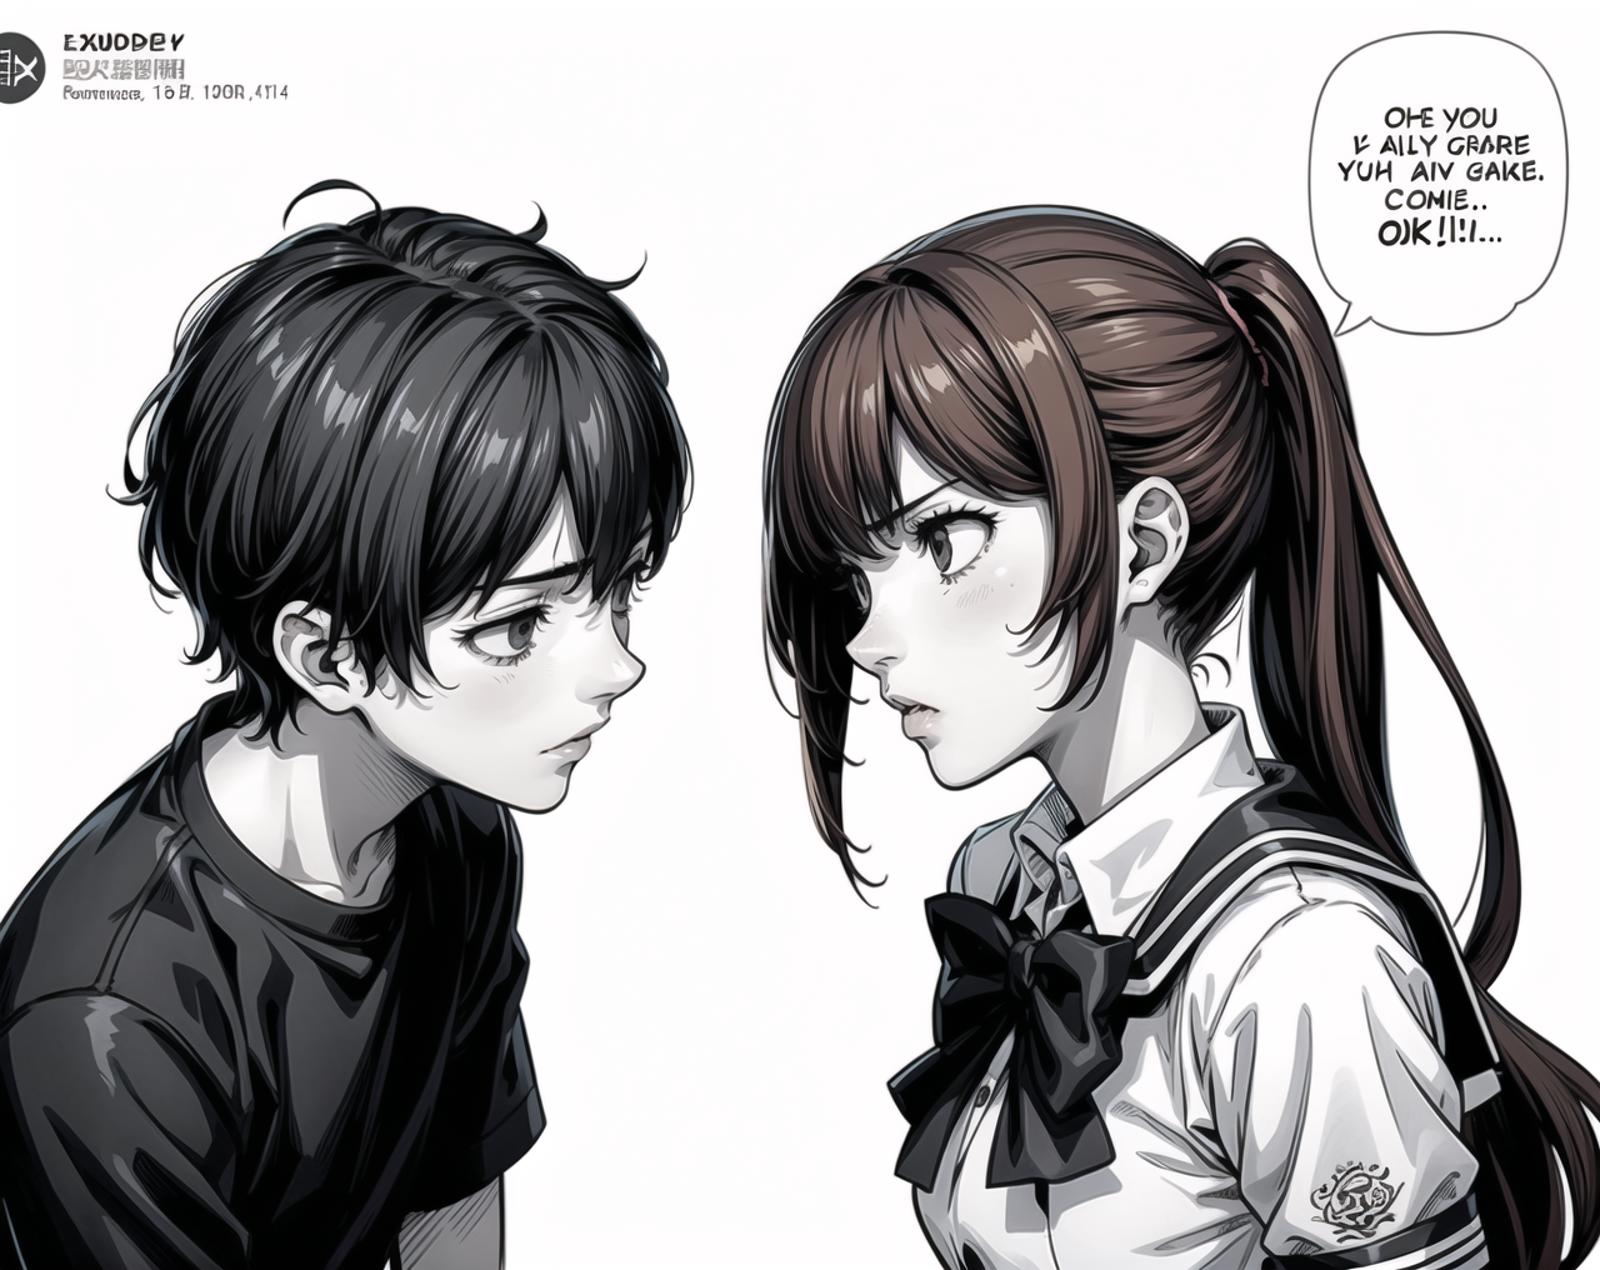 A black and white comic of a young girl and a boy.